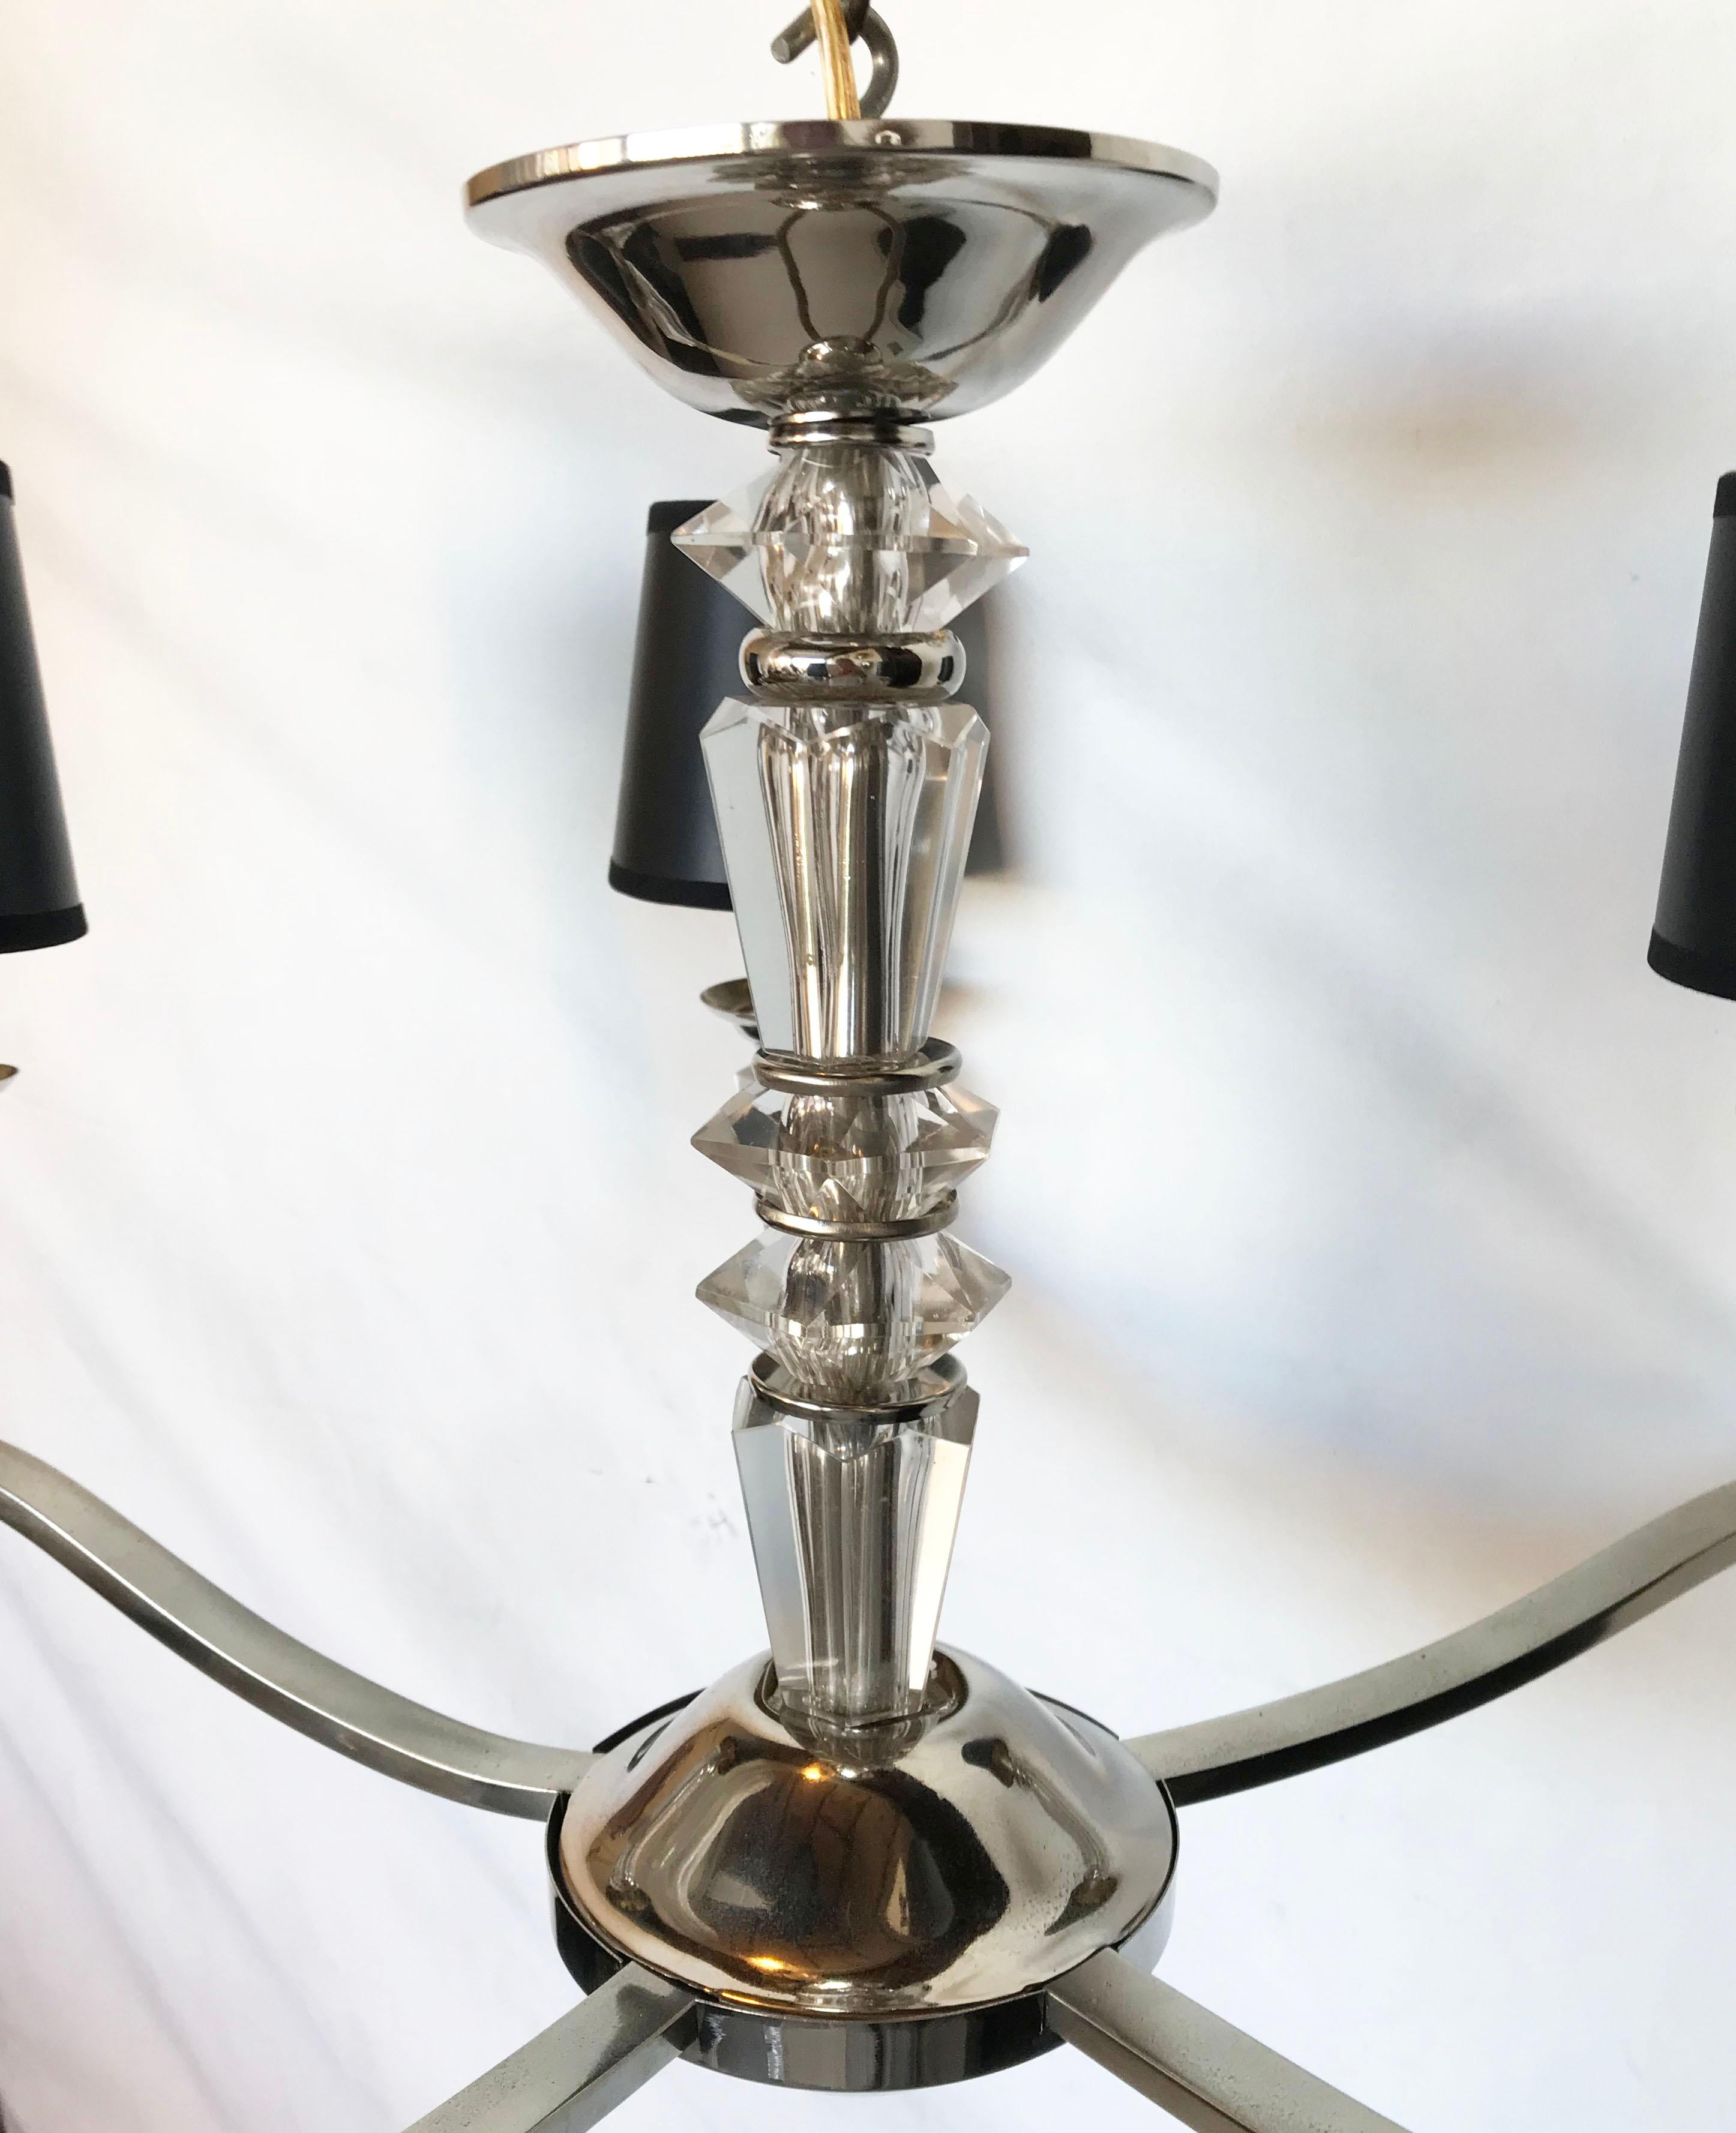 Superb Jacques Adnet style chrome and glass chandelier or Flushmount 
5 lights, 40 watts max bulb
US rewired and in working condition
chain dimension adjustable on demand.